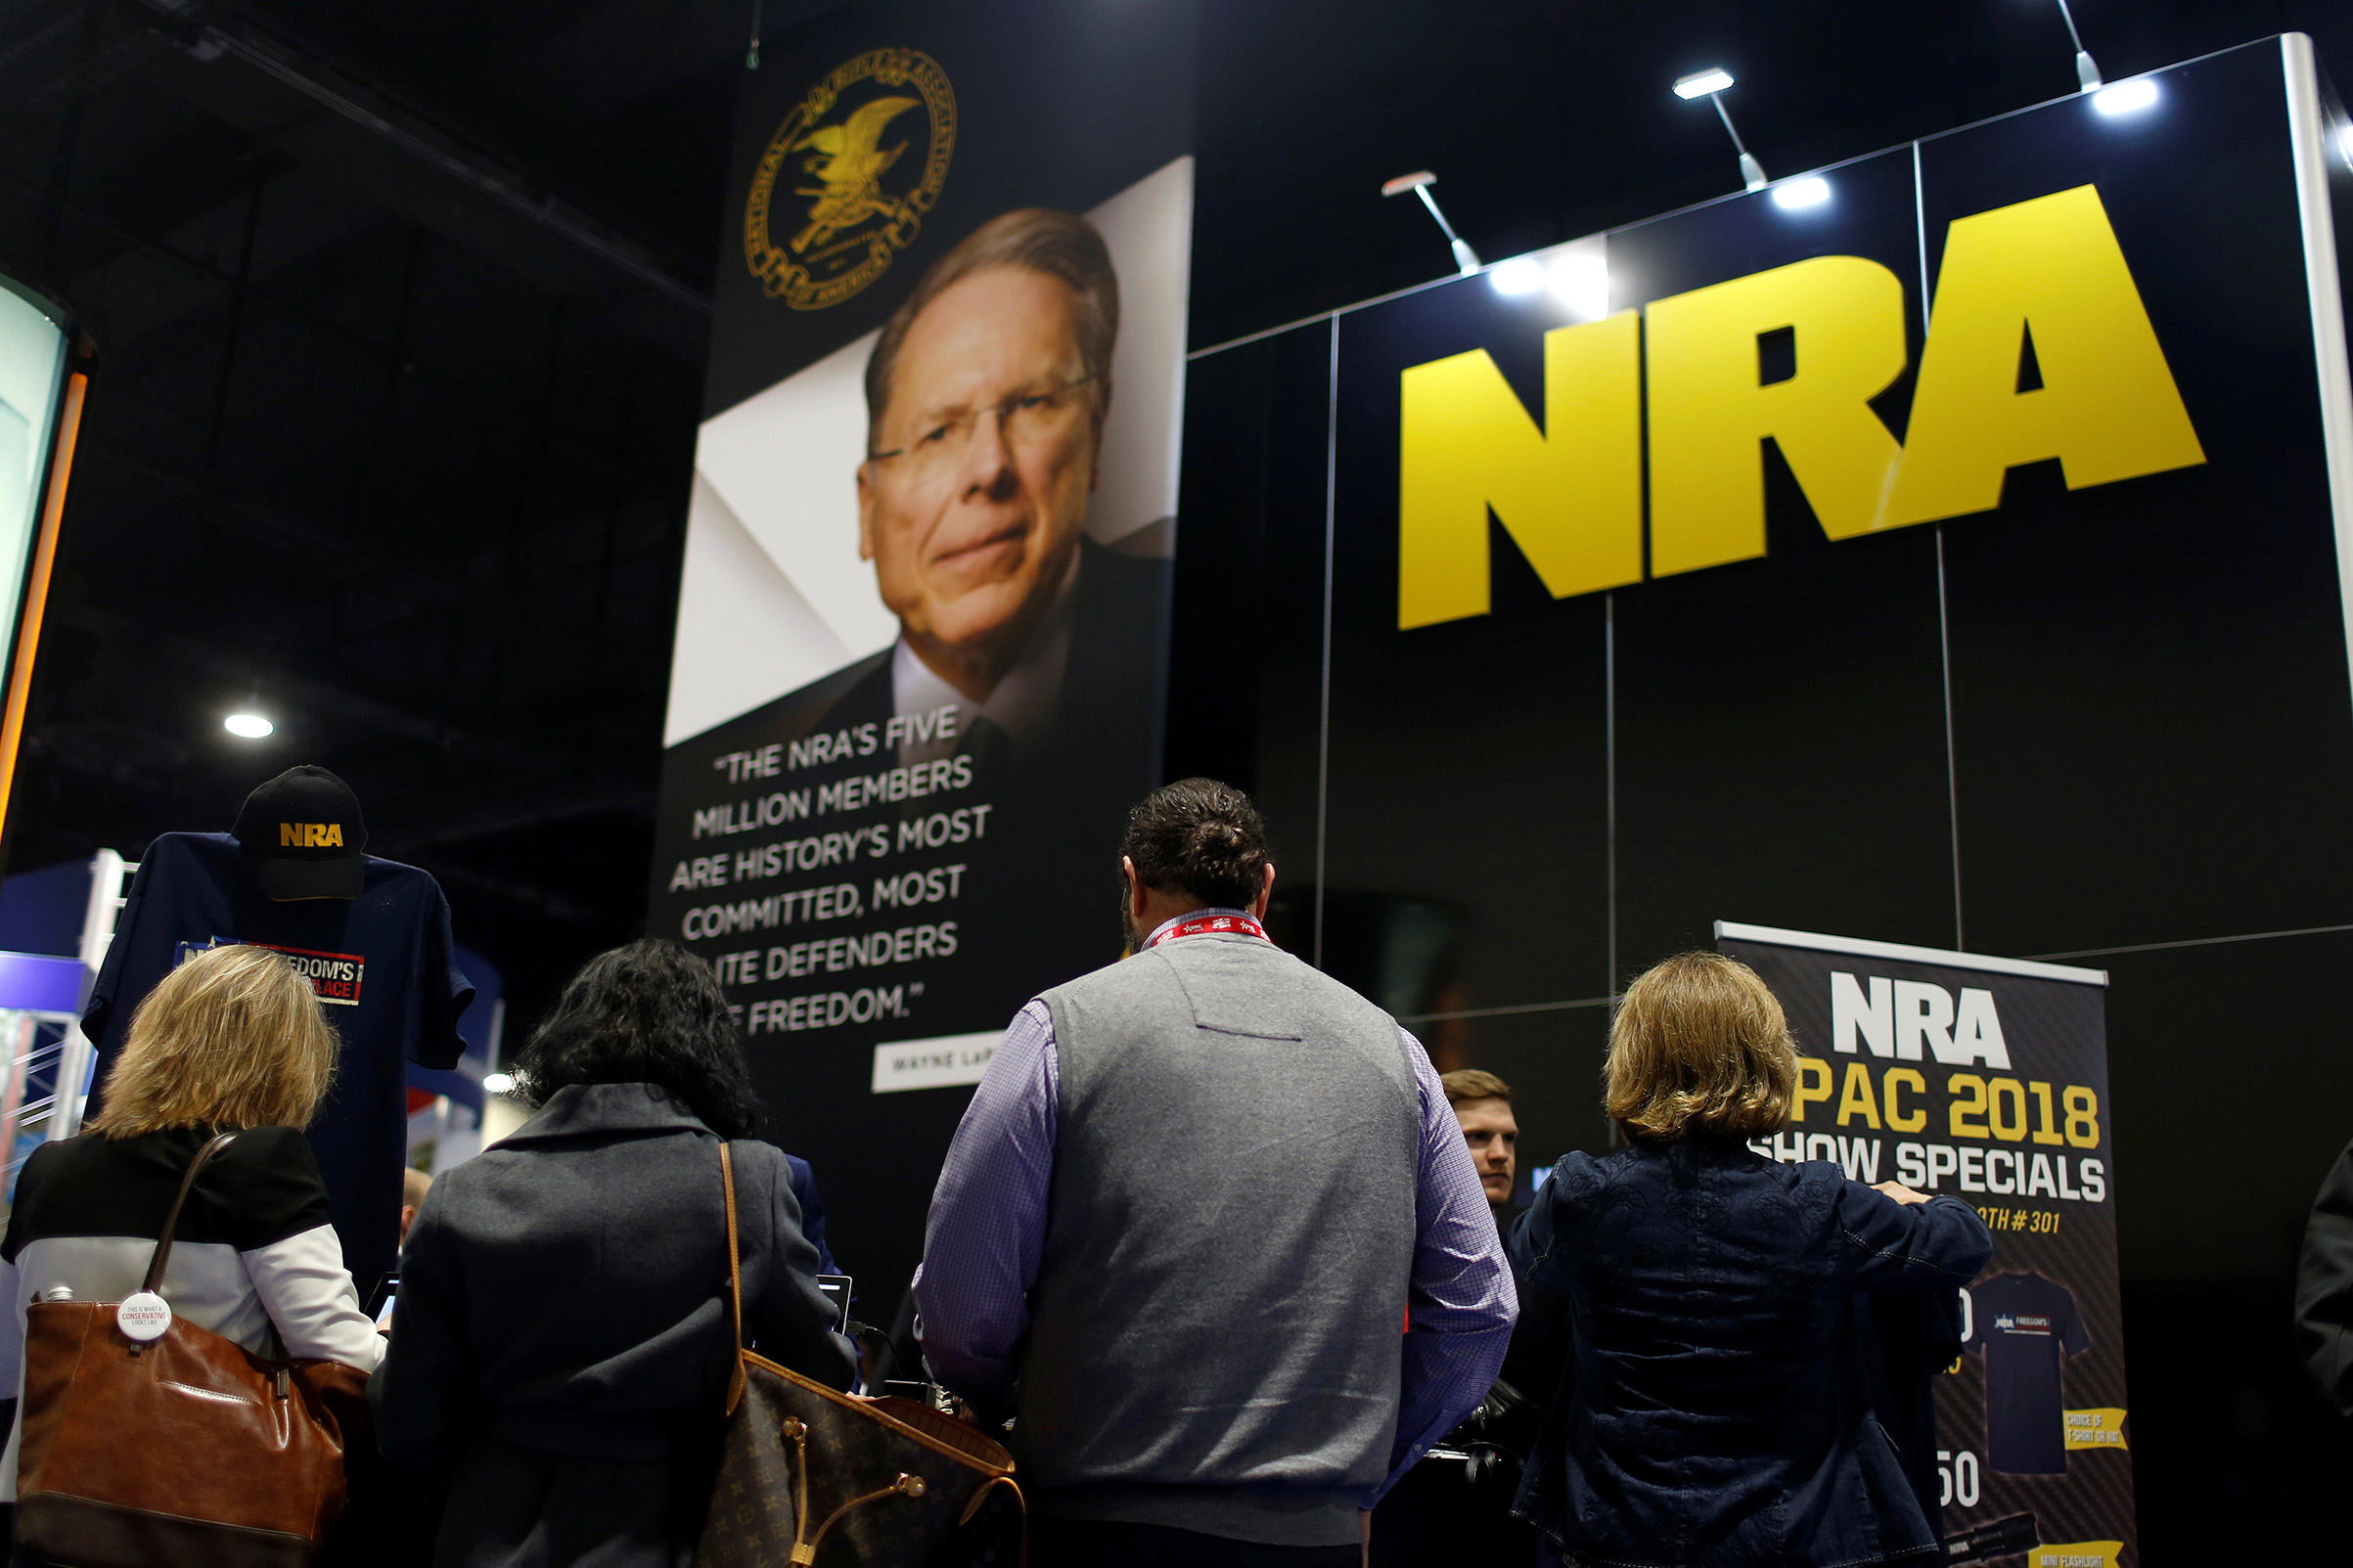 People sign up at the booth for the National Rifle Association (NRA) at the Conservative Political Action Conference (CPAC) at National Harbor, Md., on Feb. 23, 2018. (Joshua Roberts—Reuters)